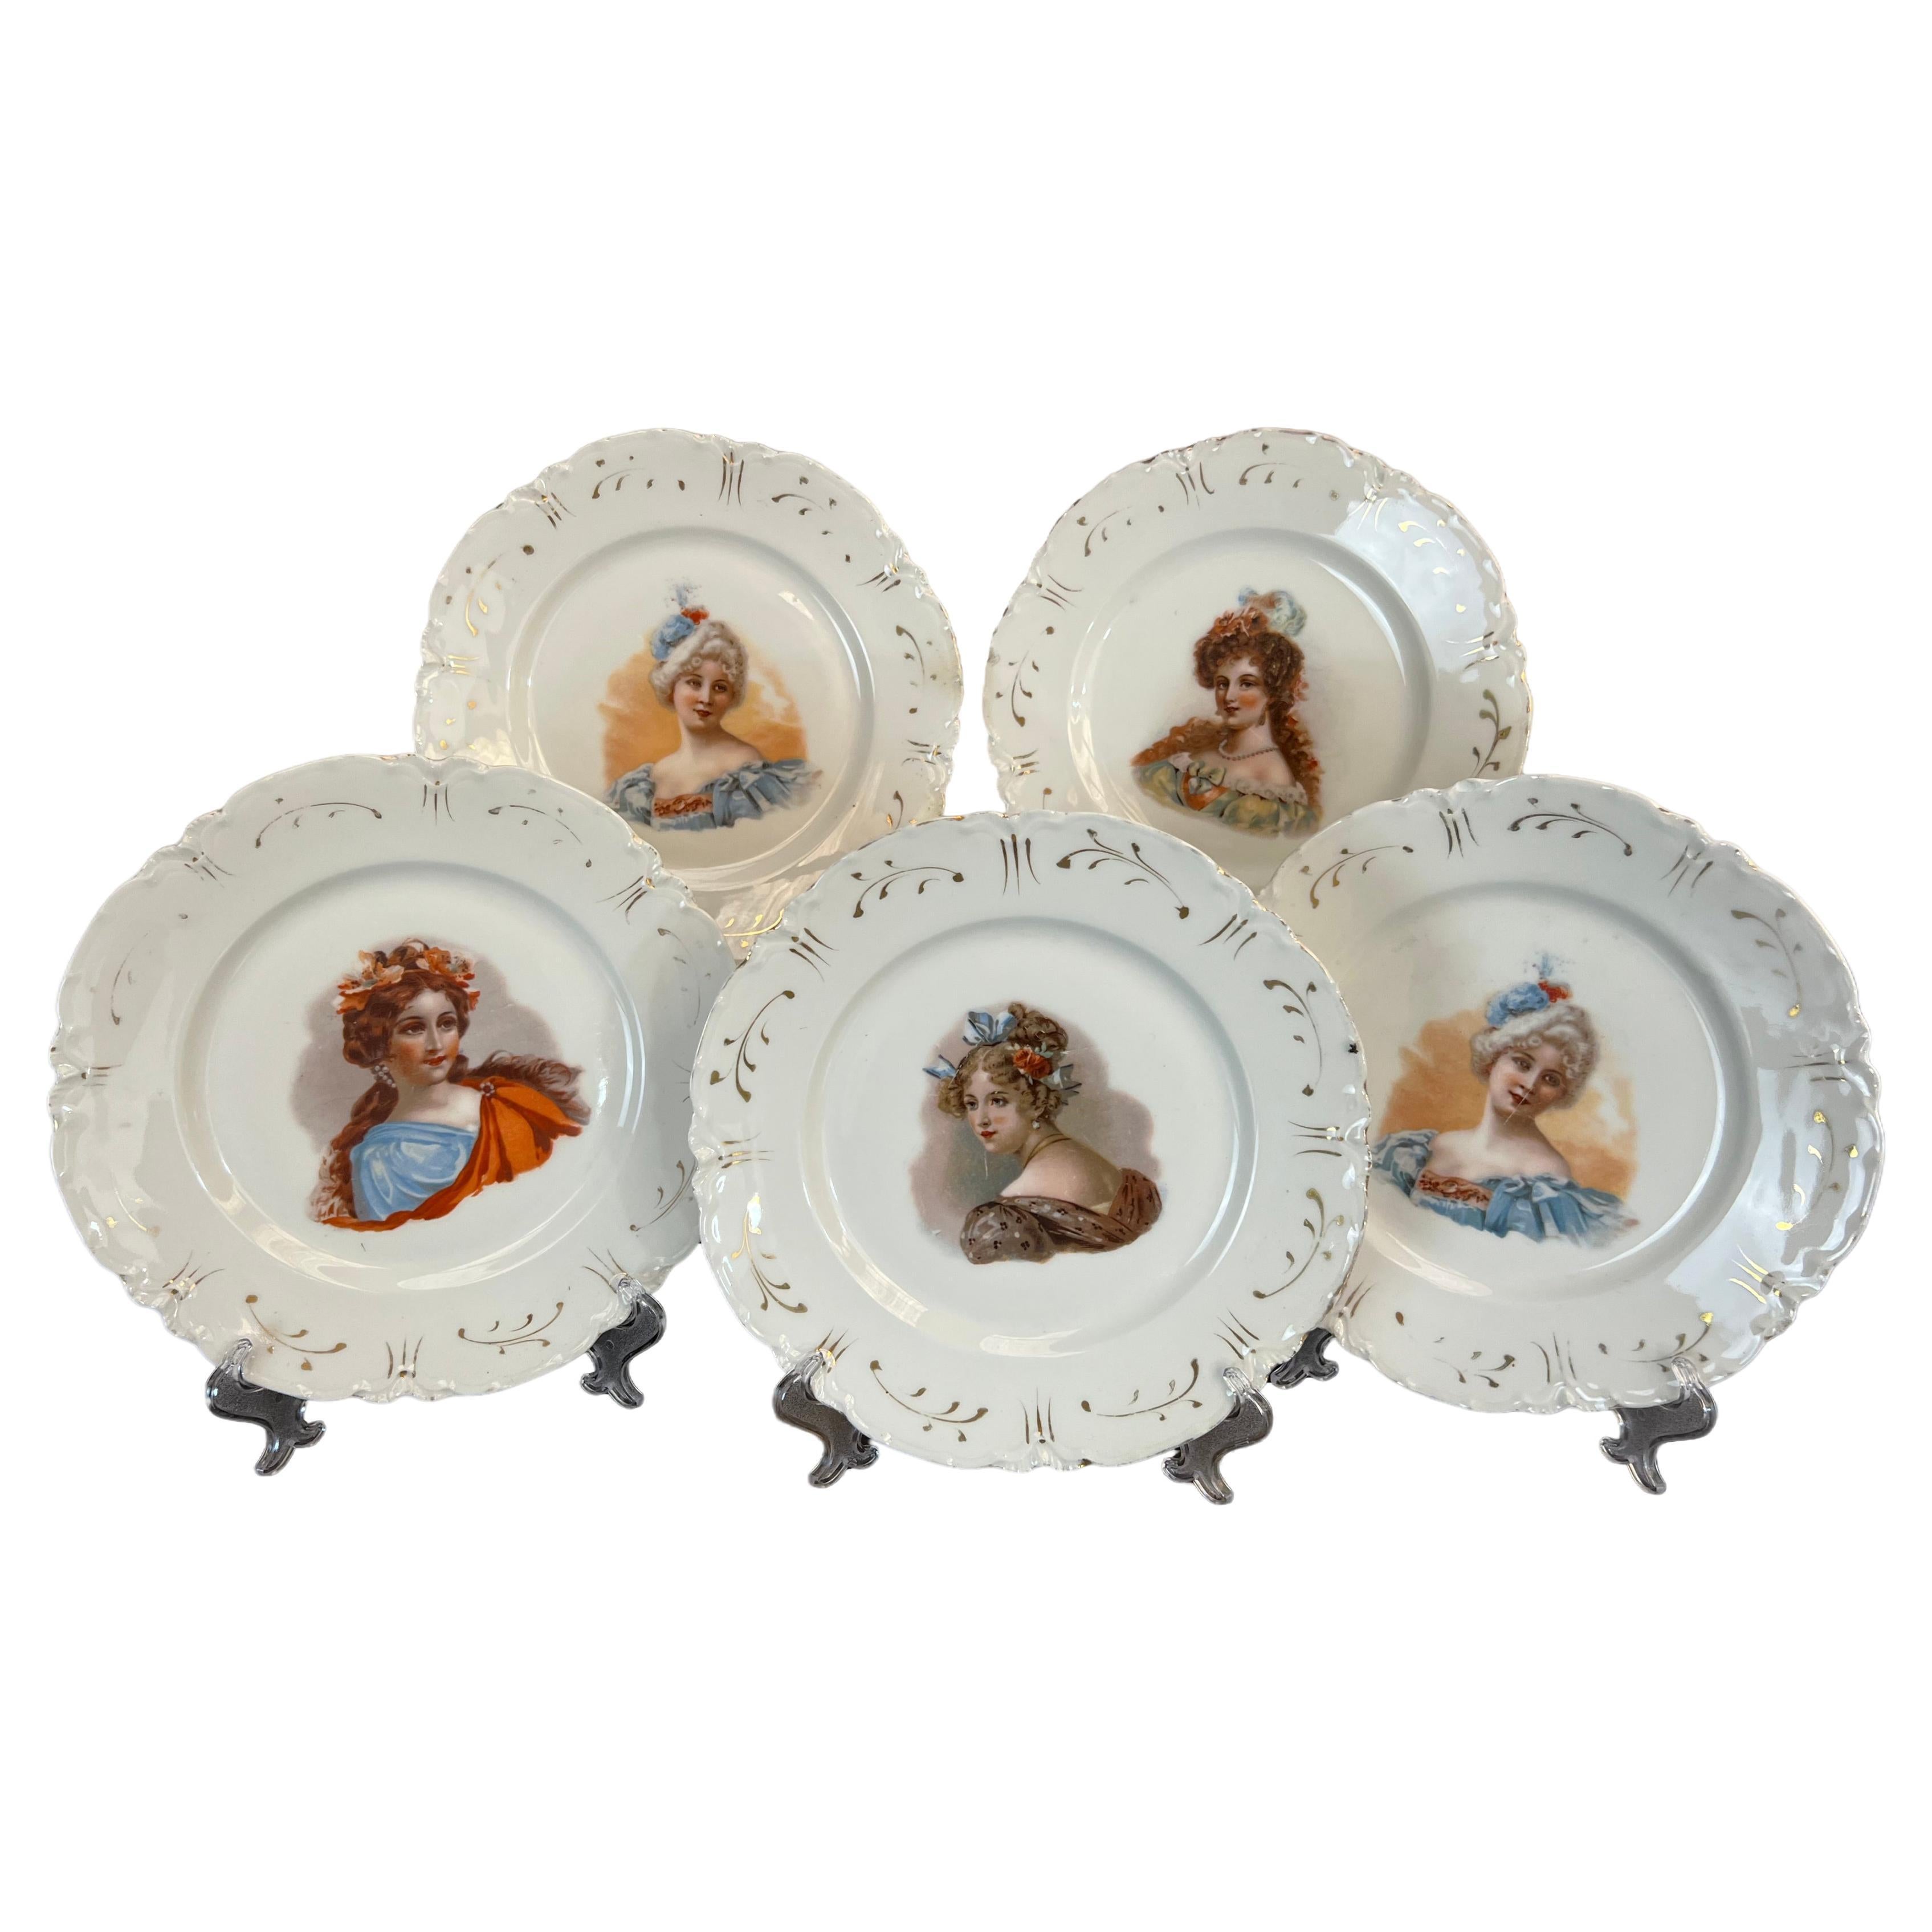 Set 5 collectible plates Haviland Limoges with women 19th For Sale